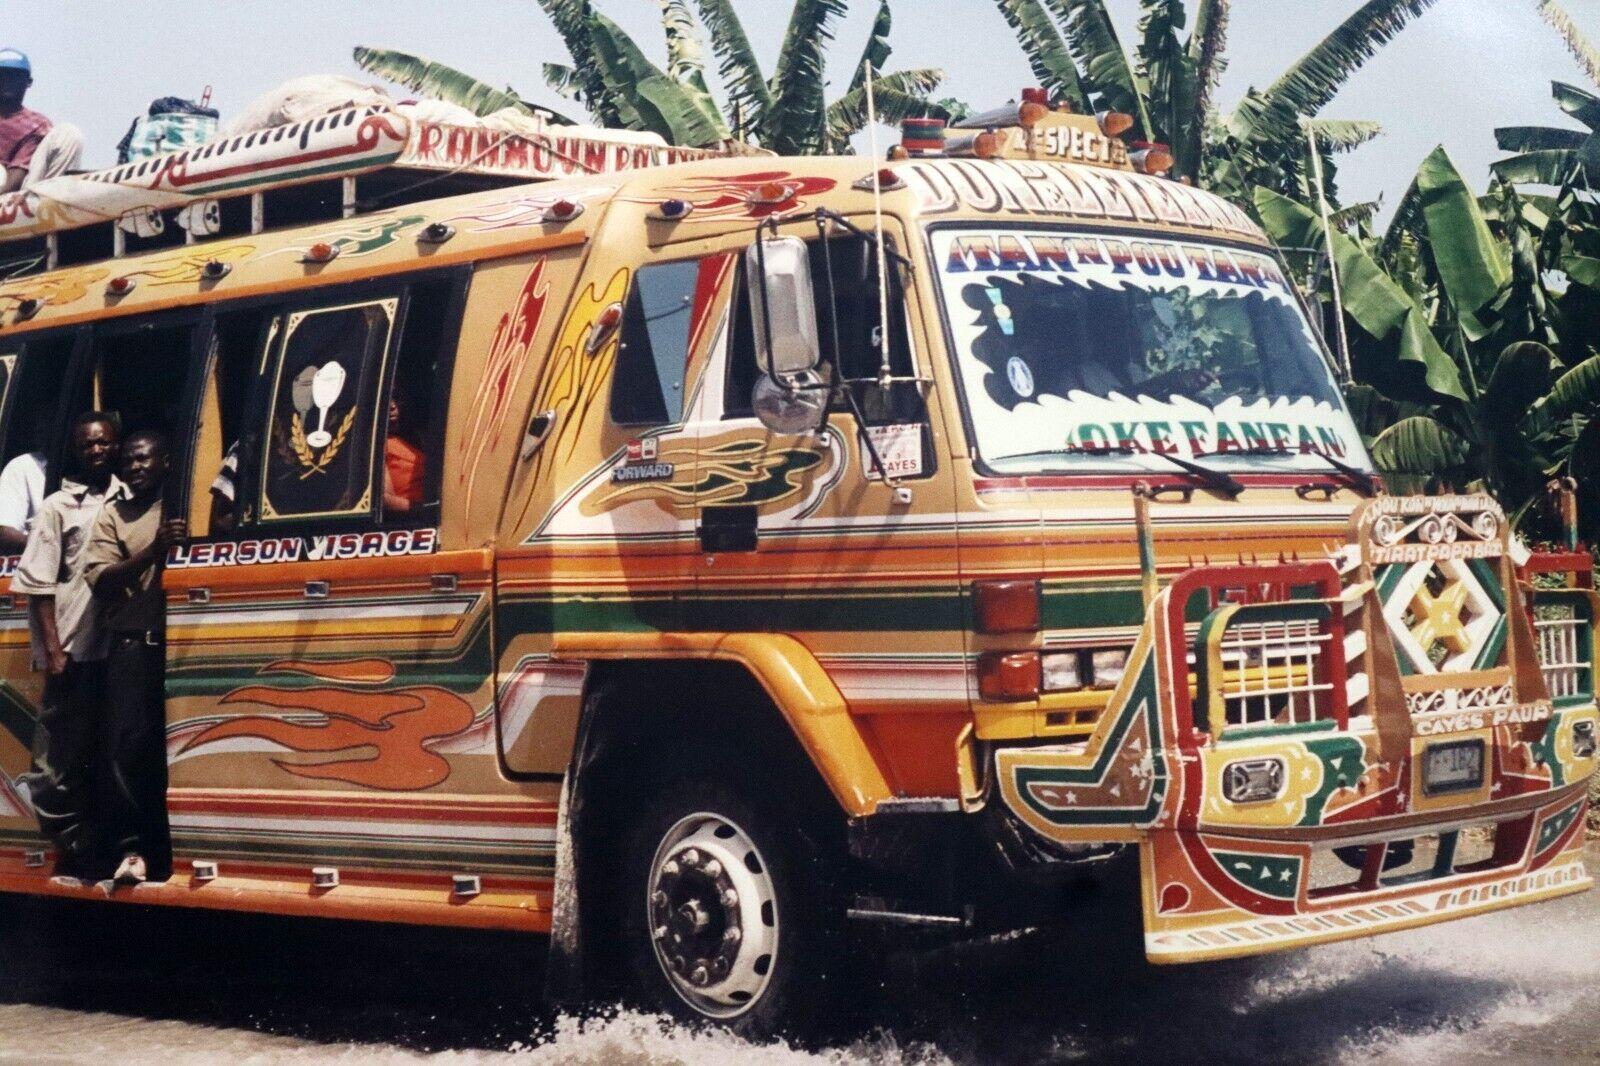 A rich, vibrant, contemporary photograph depicting a Haitian colorful bus by award winning photographer Chantel James. Dimensions: 16h x 22w (framed). In excellent condition.

Chantal James is known for being included in the award-winning travel and